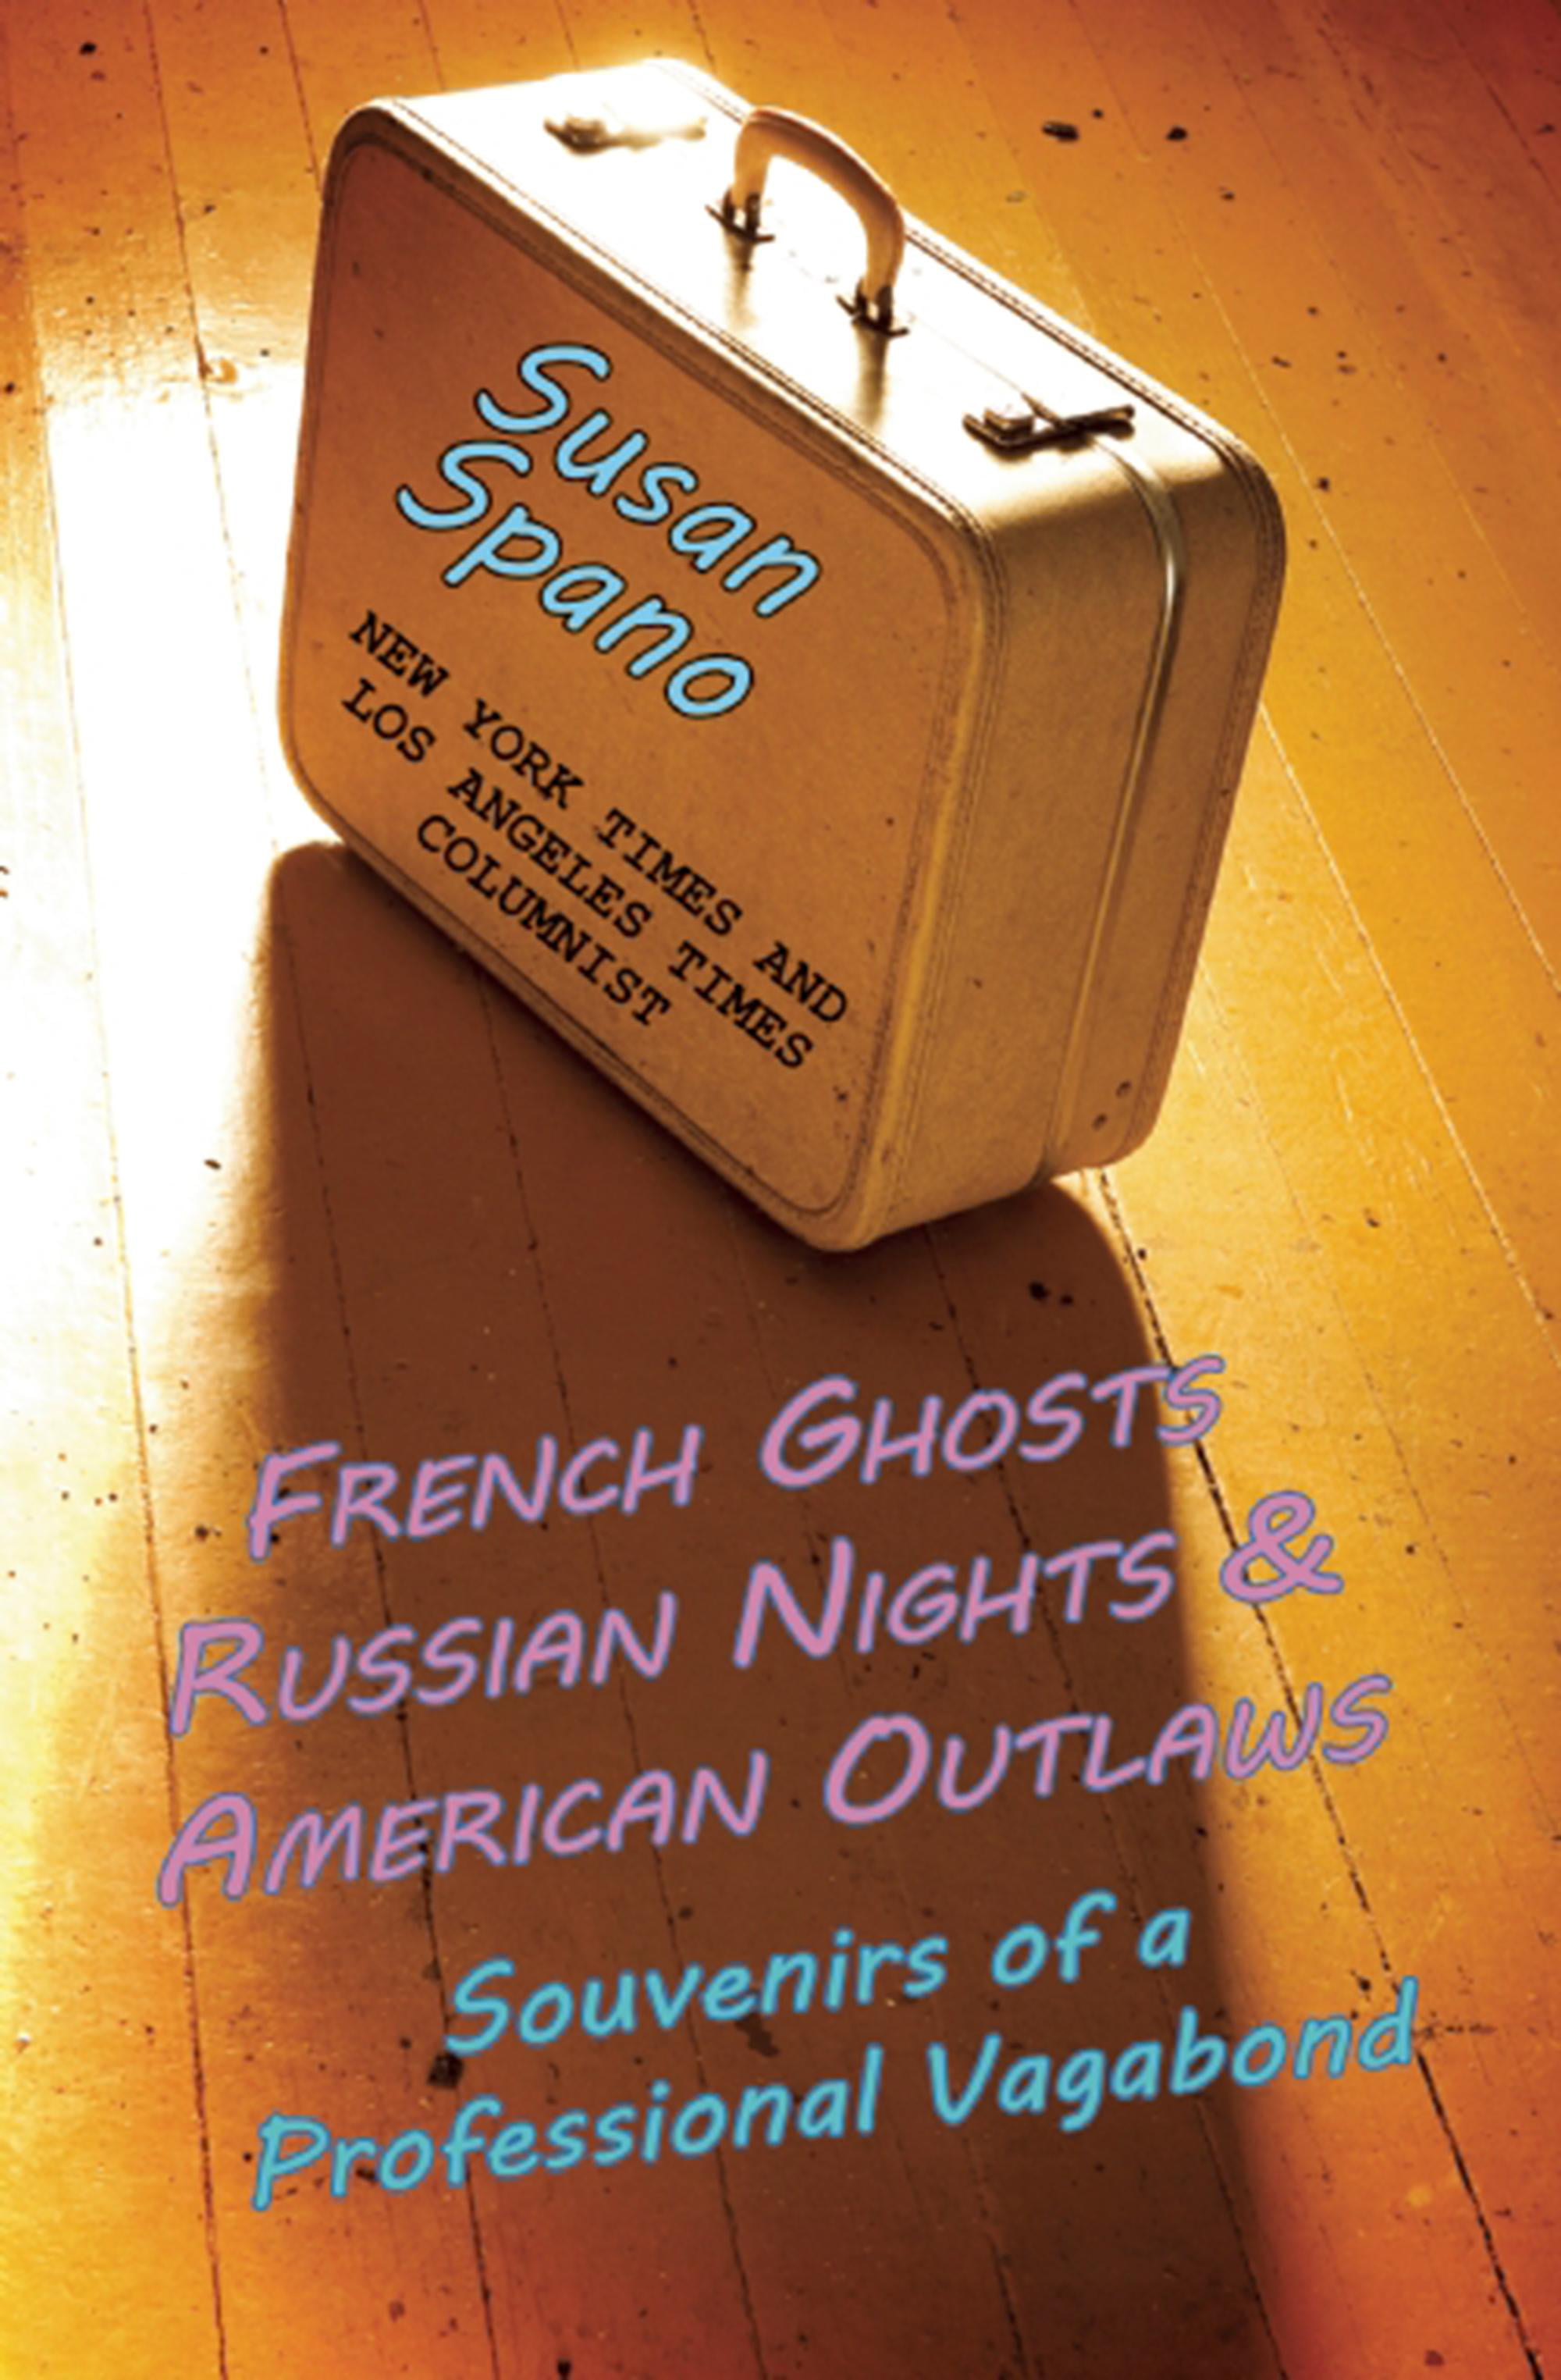 French Ghosts, Russian and American Outlaws: Souvenirs a Professional (Paperback) - Walmart.com - Walmart.com